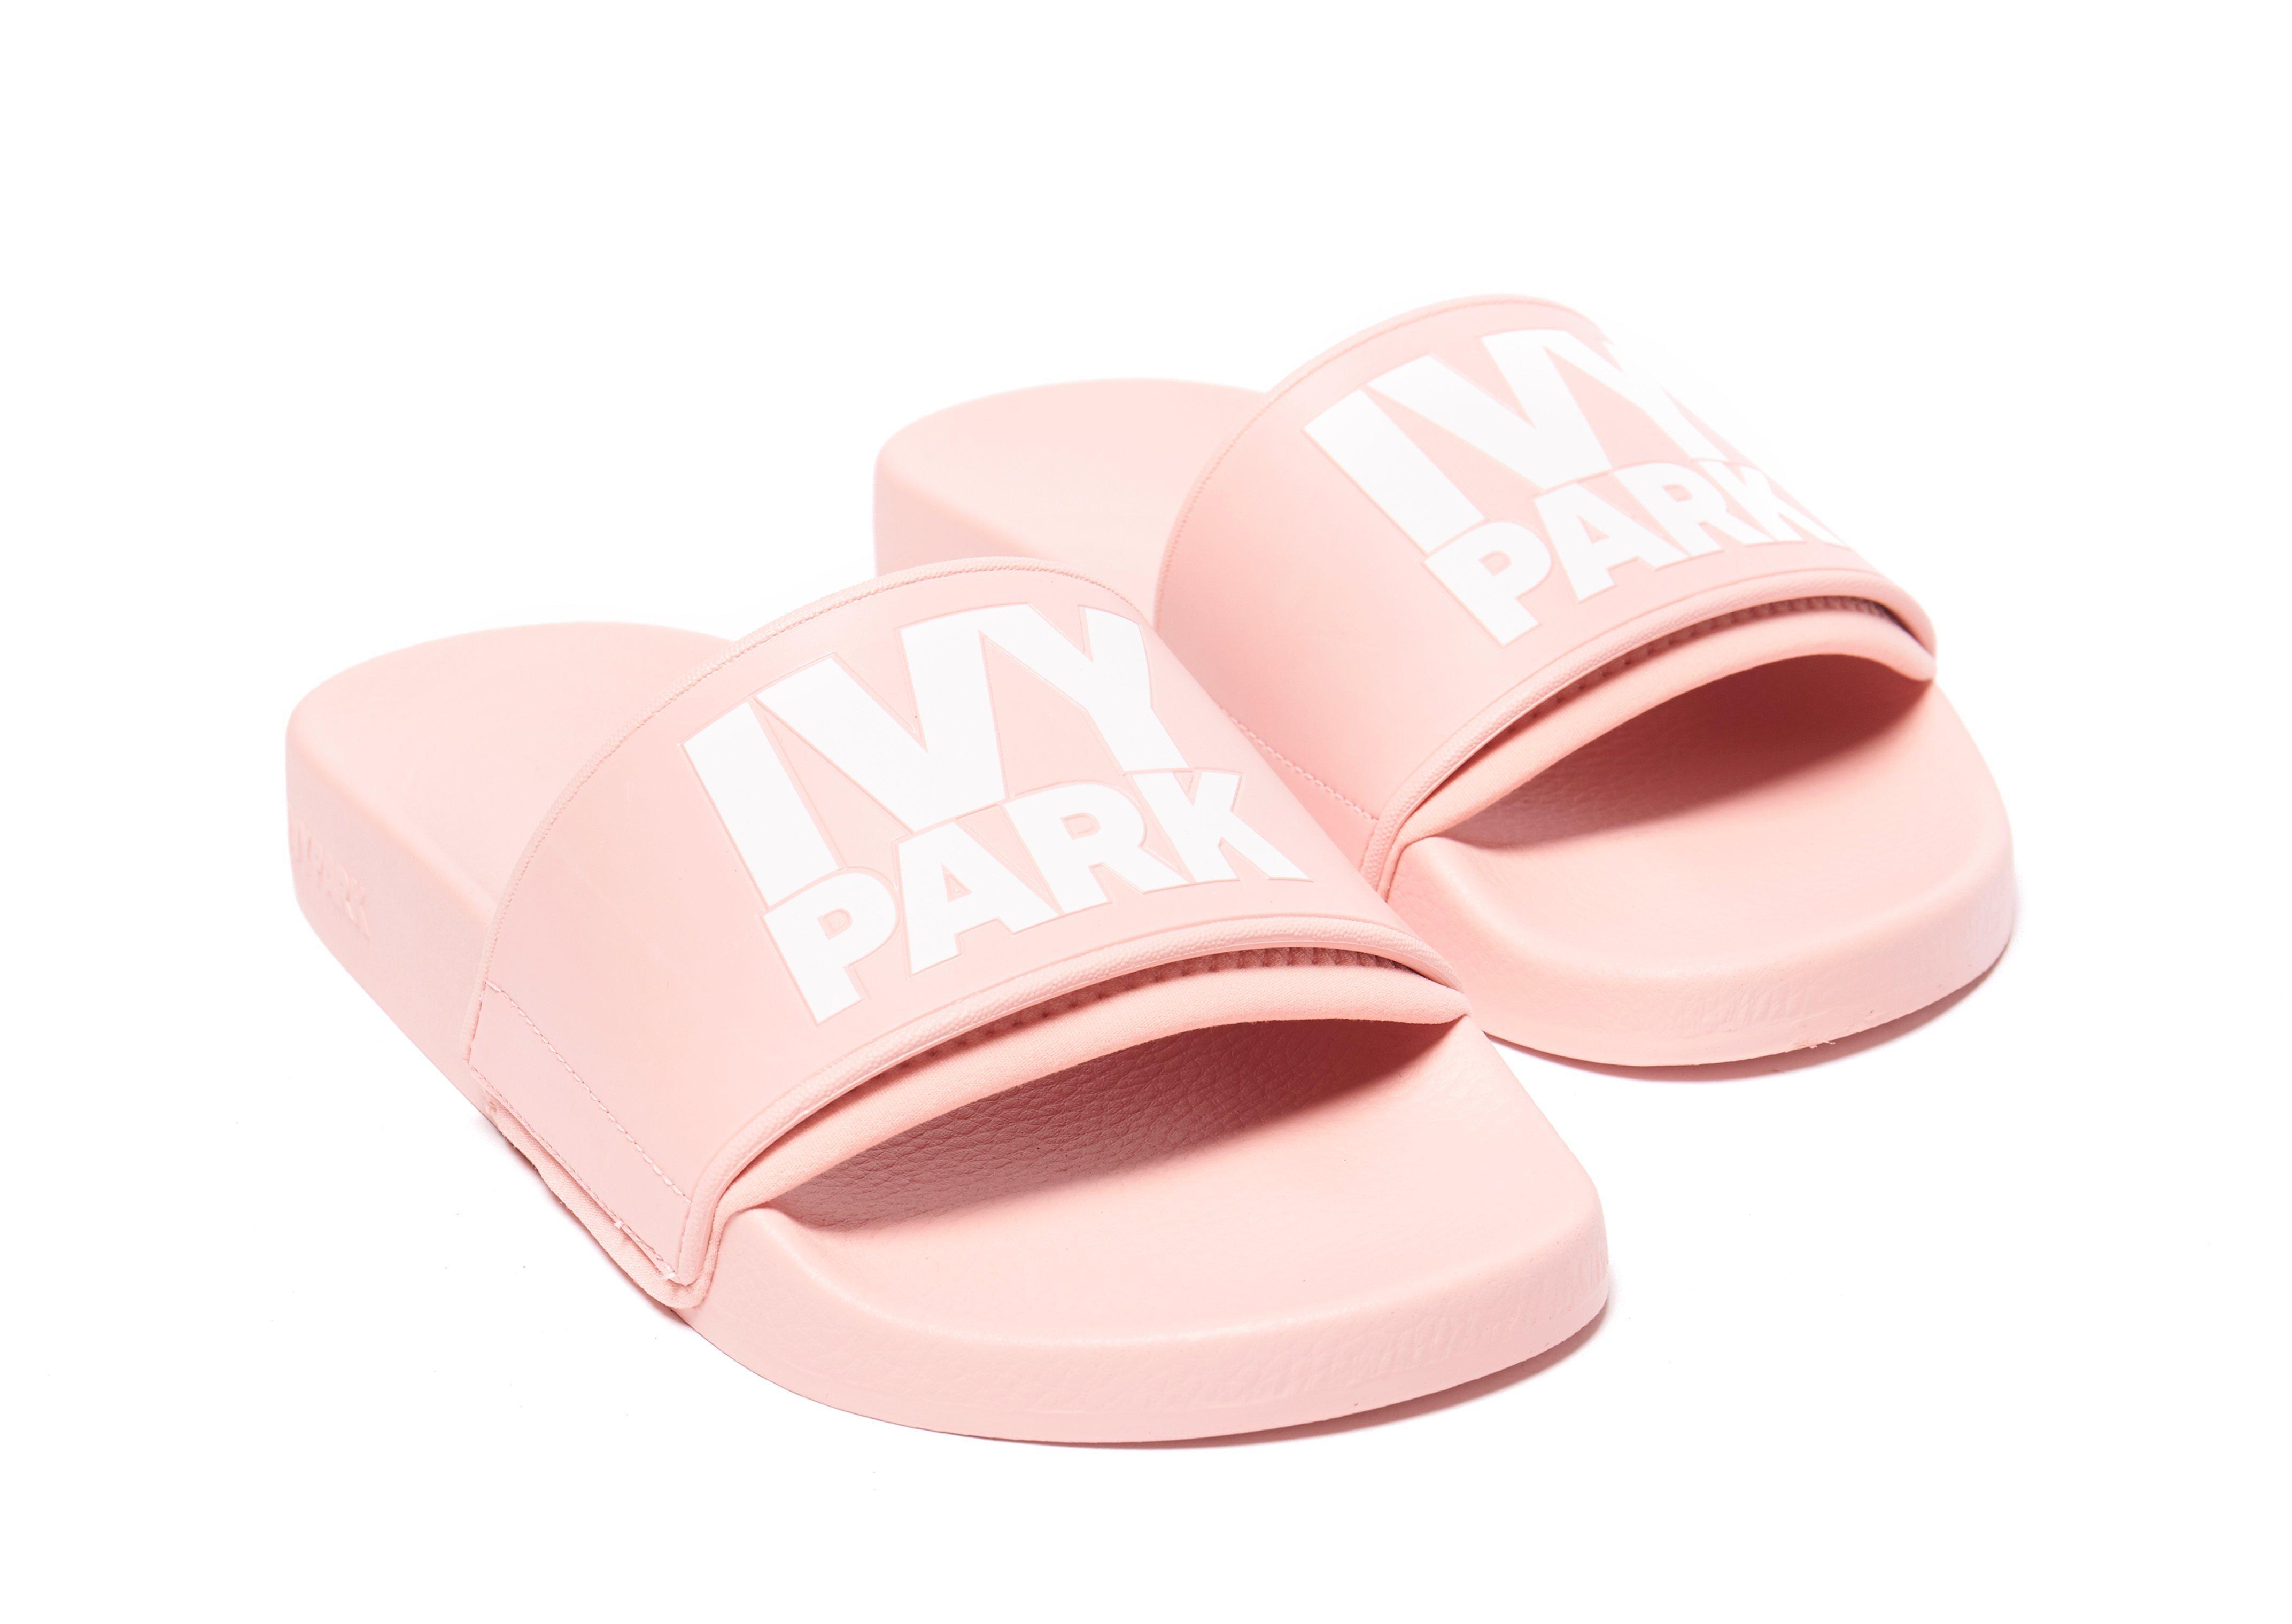 Ivy Park Synthetic Logo Slides in Pink 